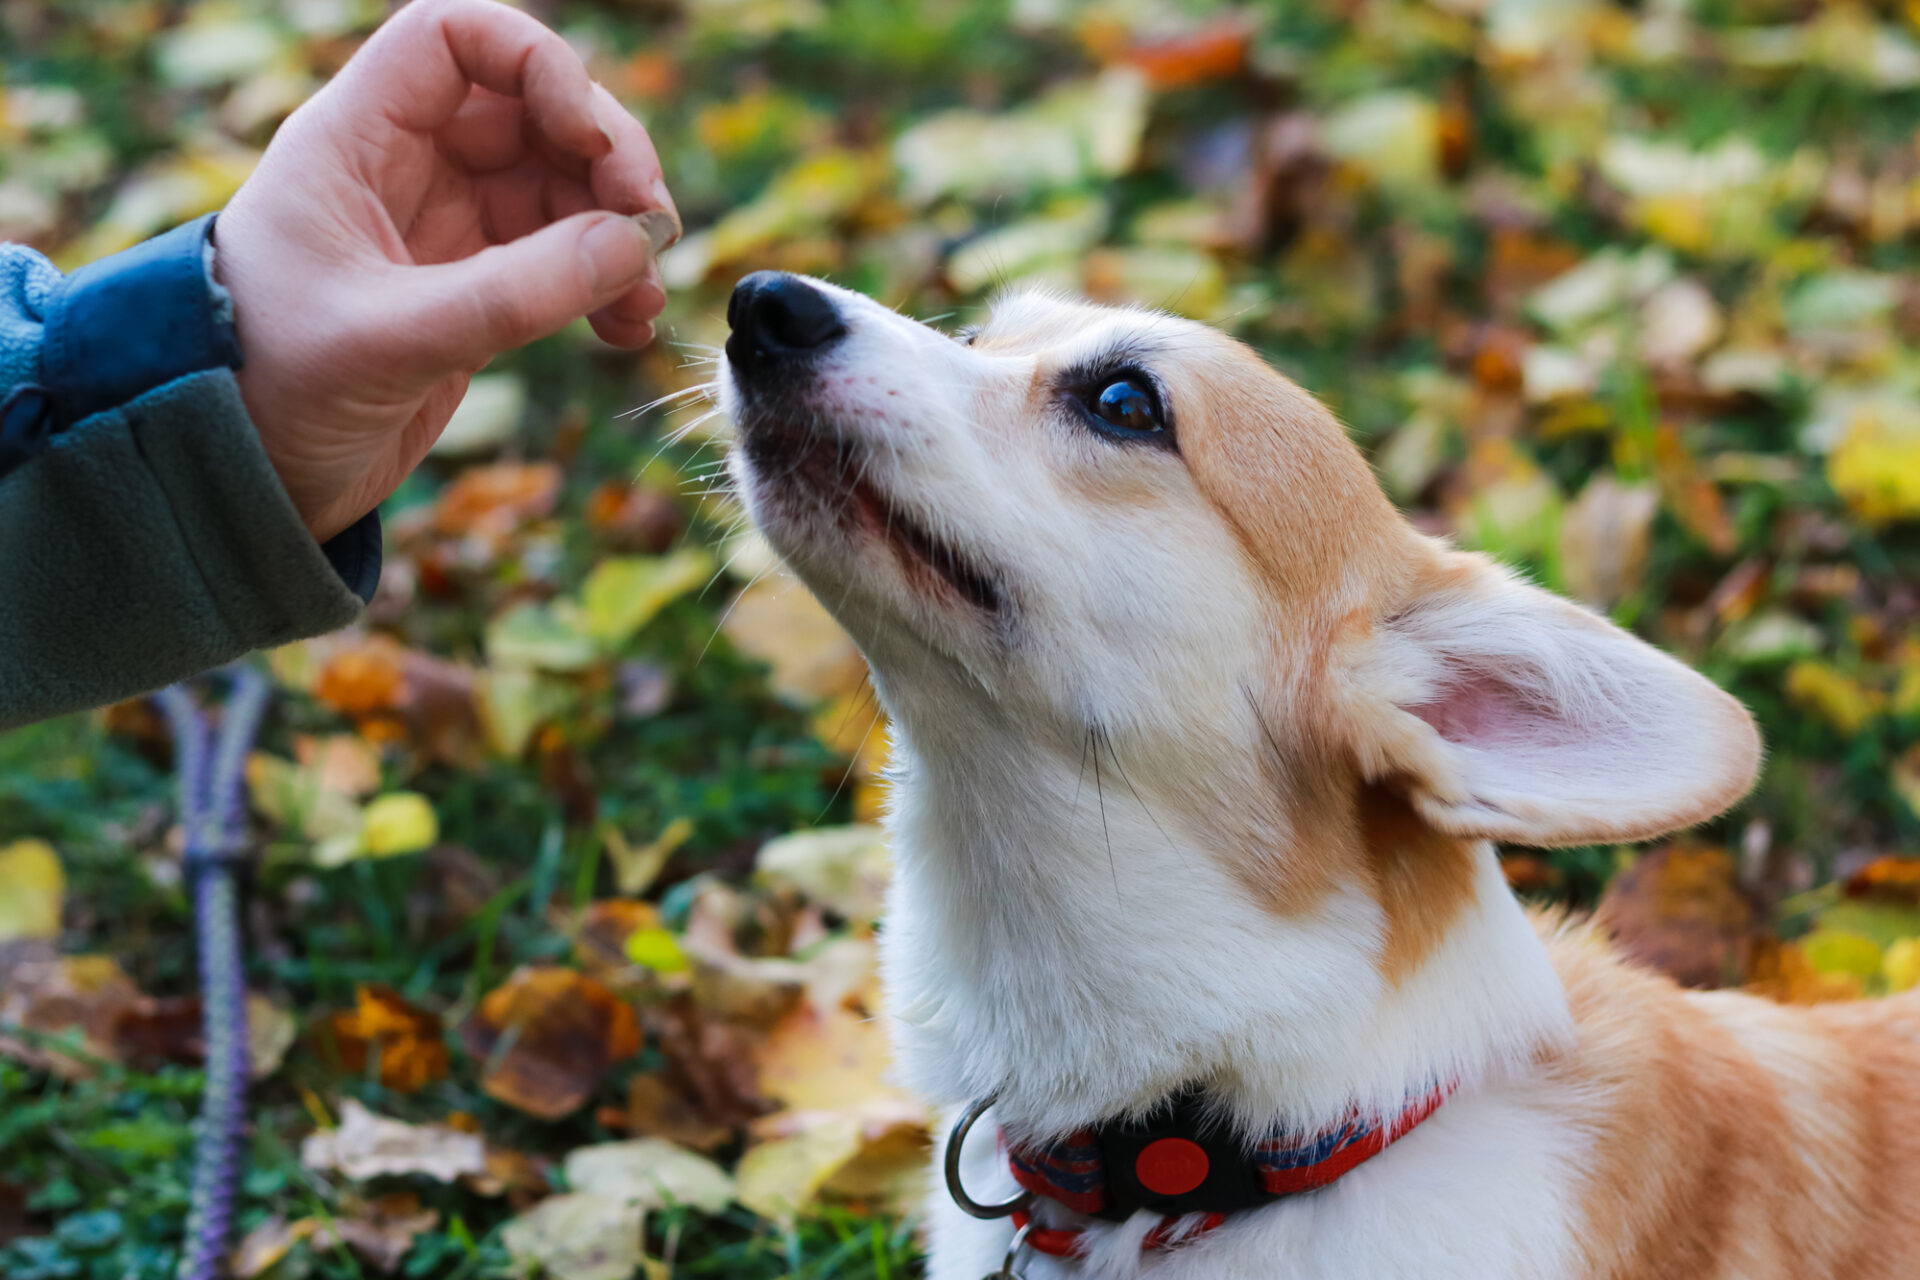 Does your dog bite your hand when you try to give them a treat?